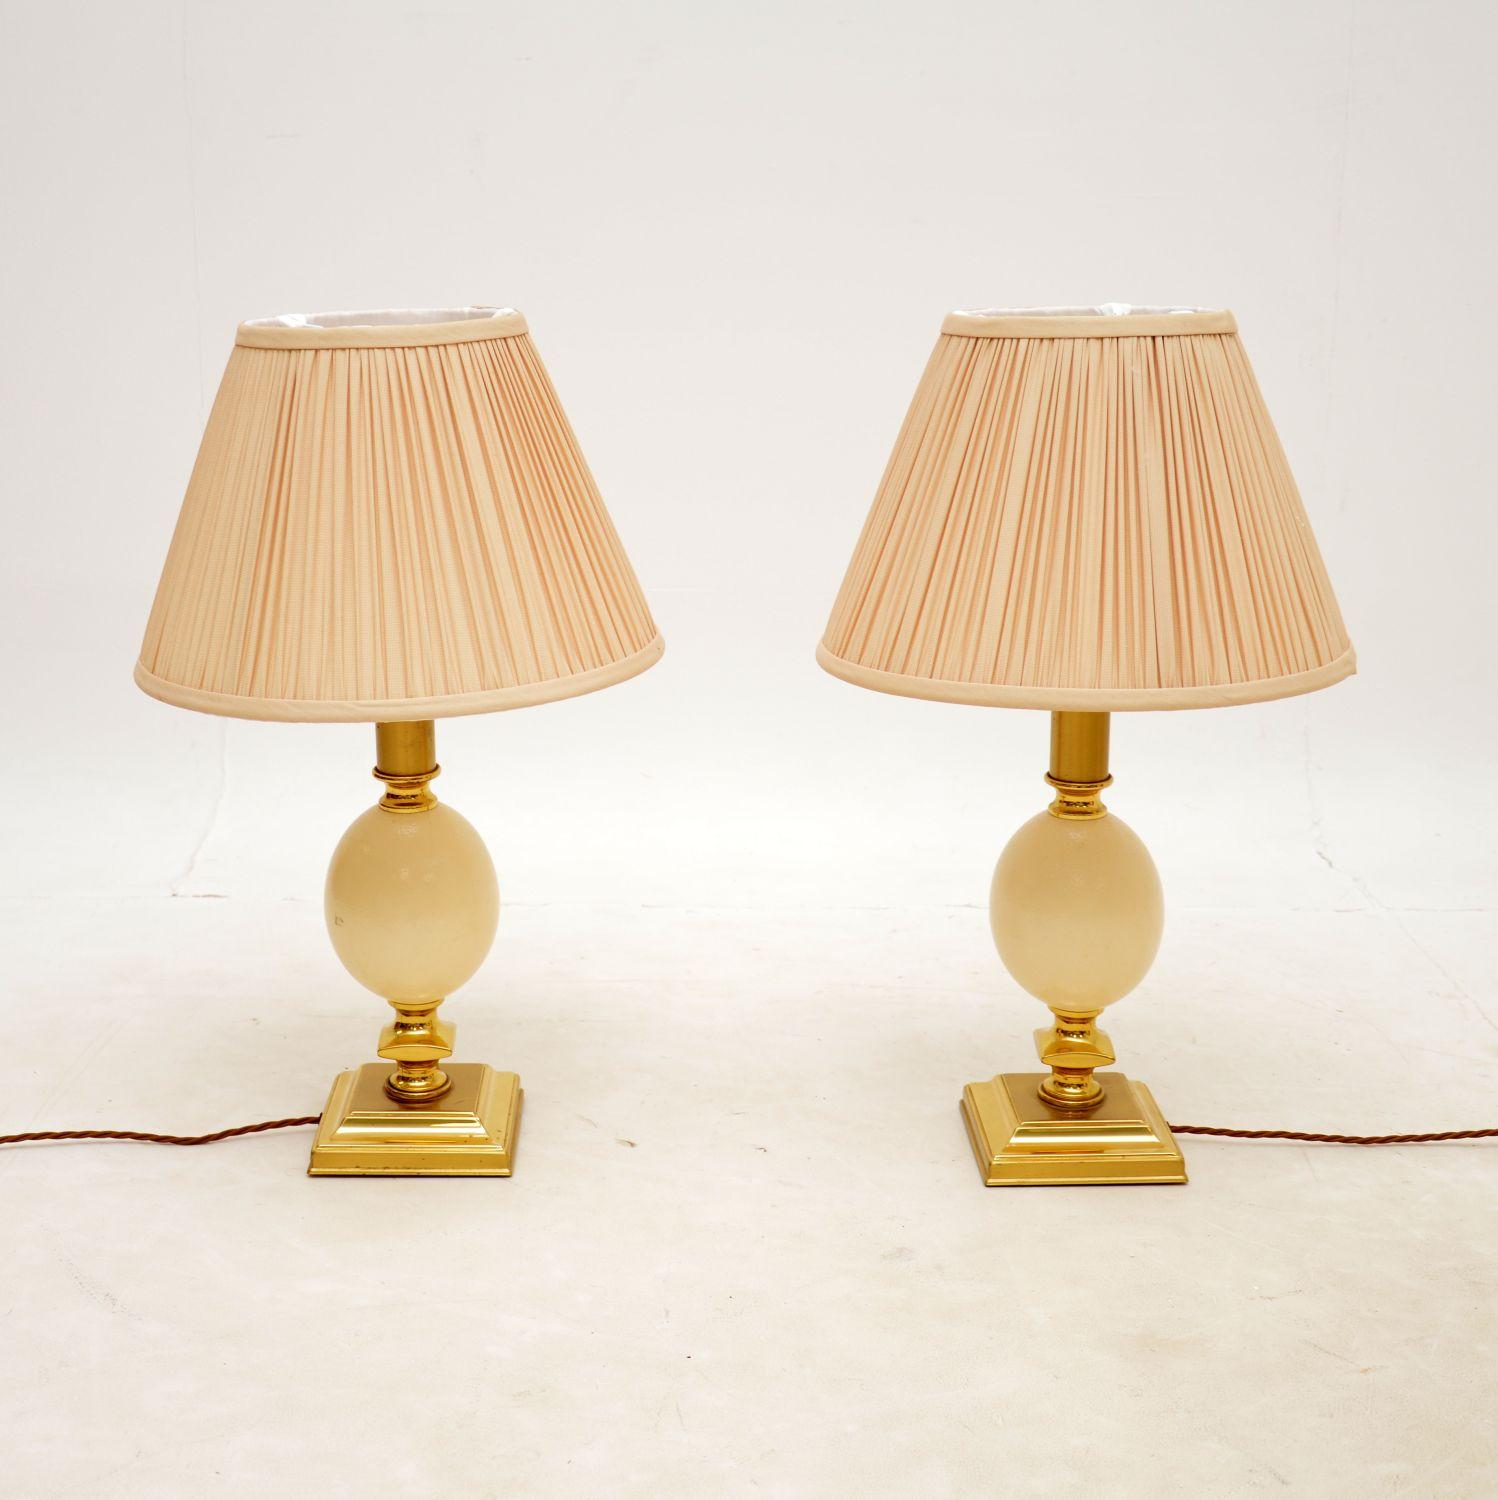 A stylish and unusual pair of vintage 1970’s brass ostrich egg lamps with faux ostrich egg bases.

The quality is excellent and they are a great size. The condition is excellent for their age, they are clean and free from damage. We have had these